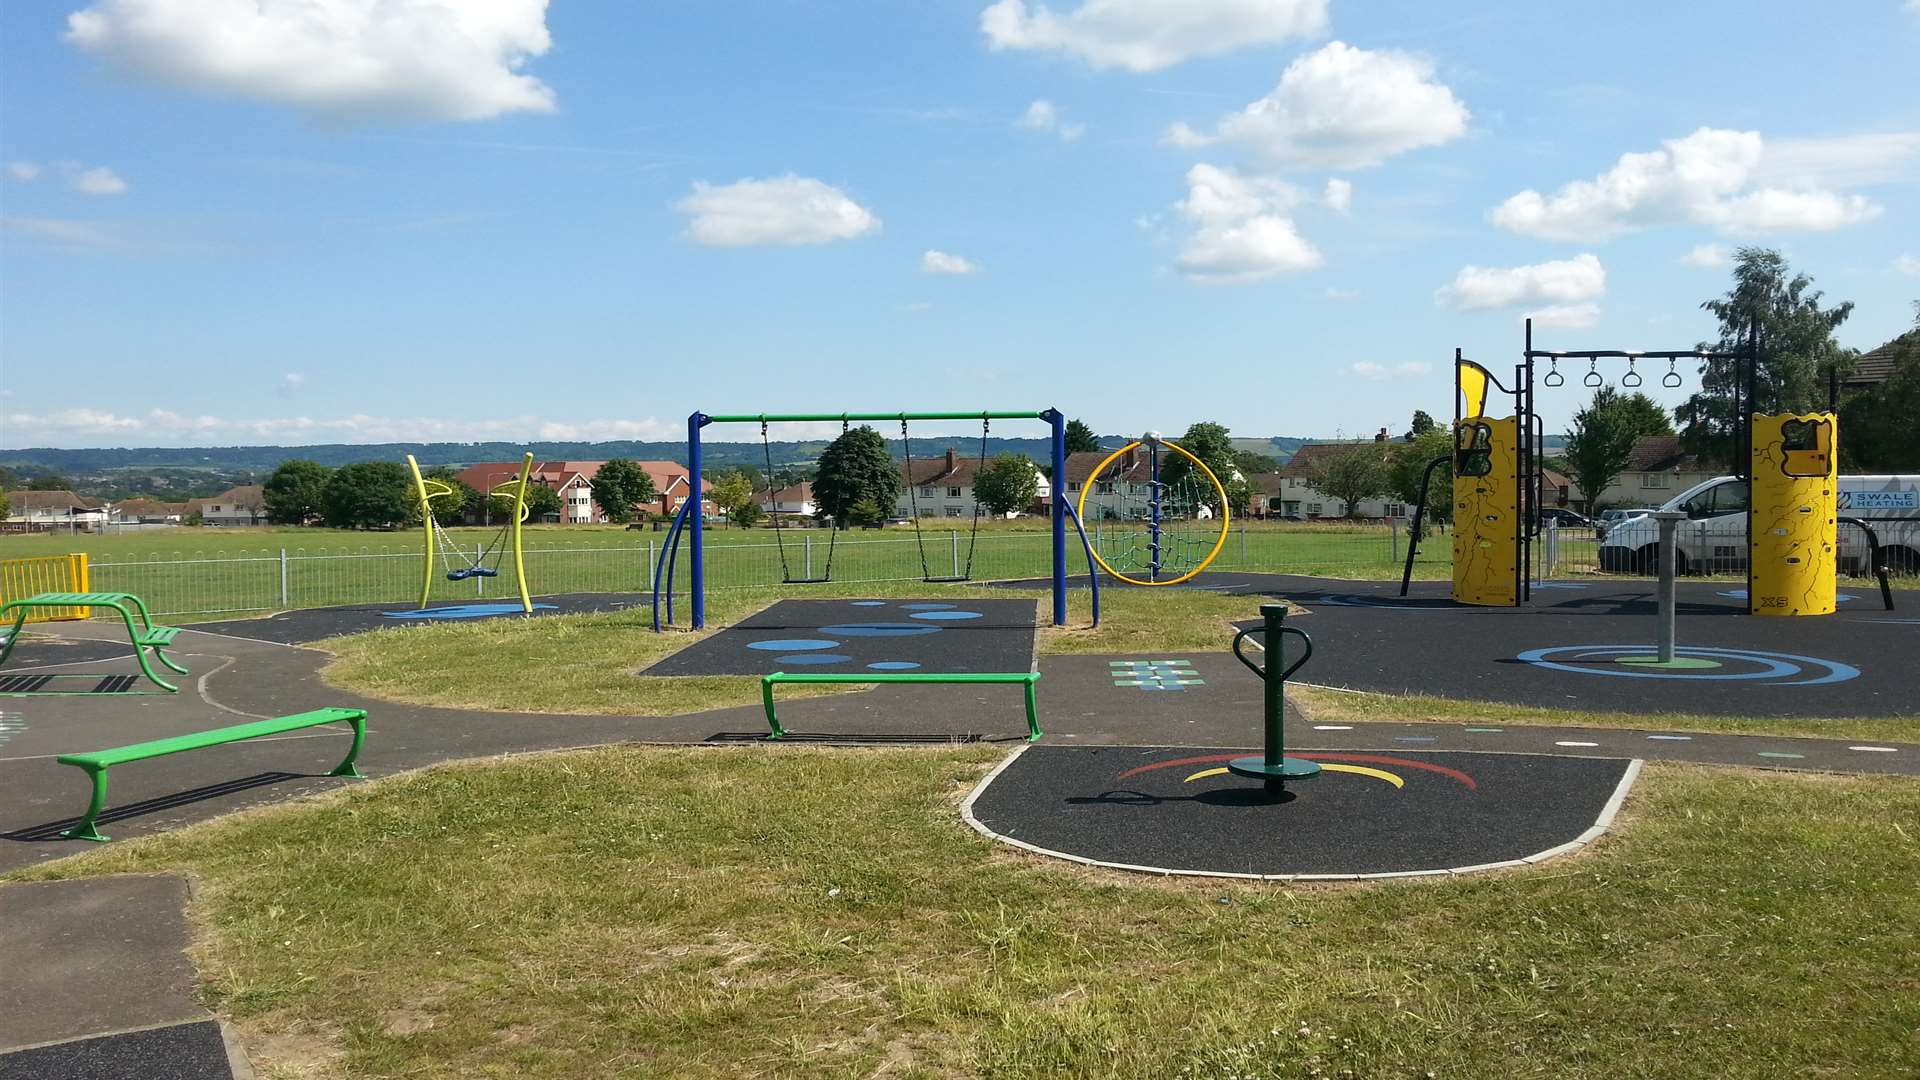 The playground in Shepway where terrified children were confronted with a man wielding a knife